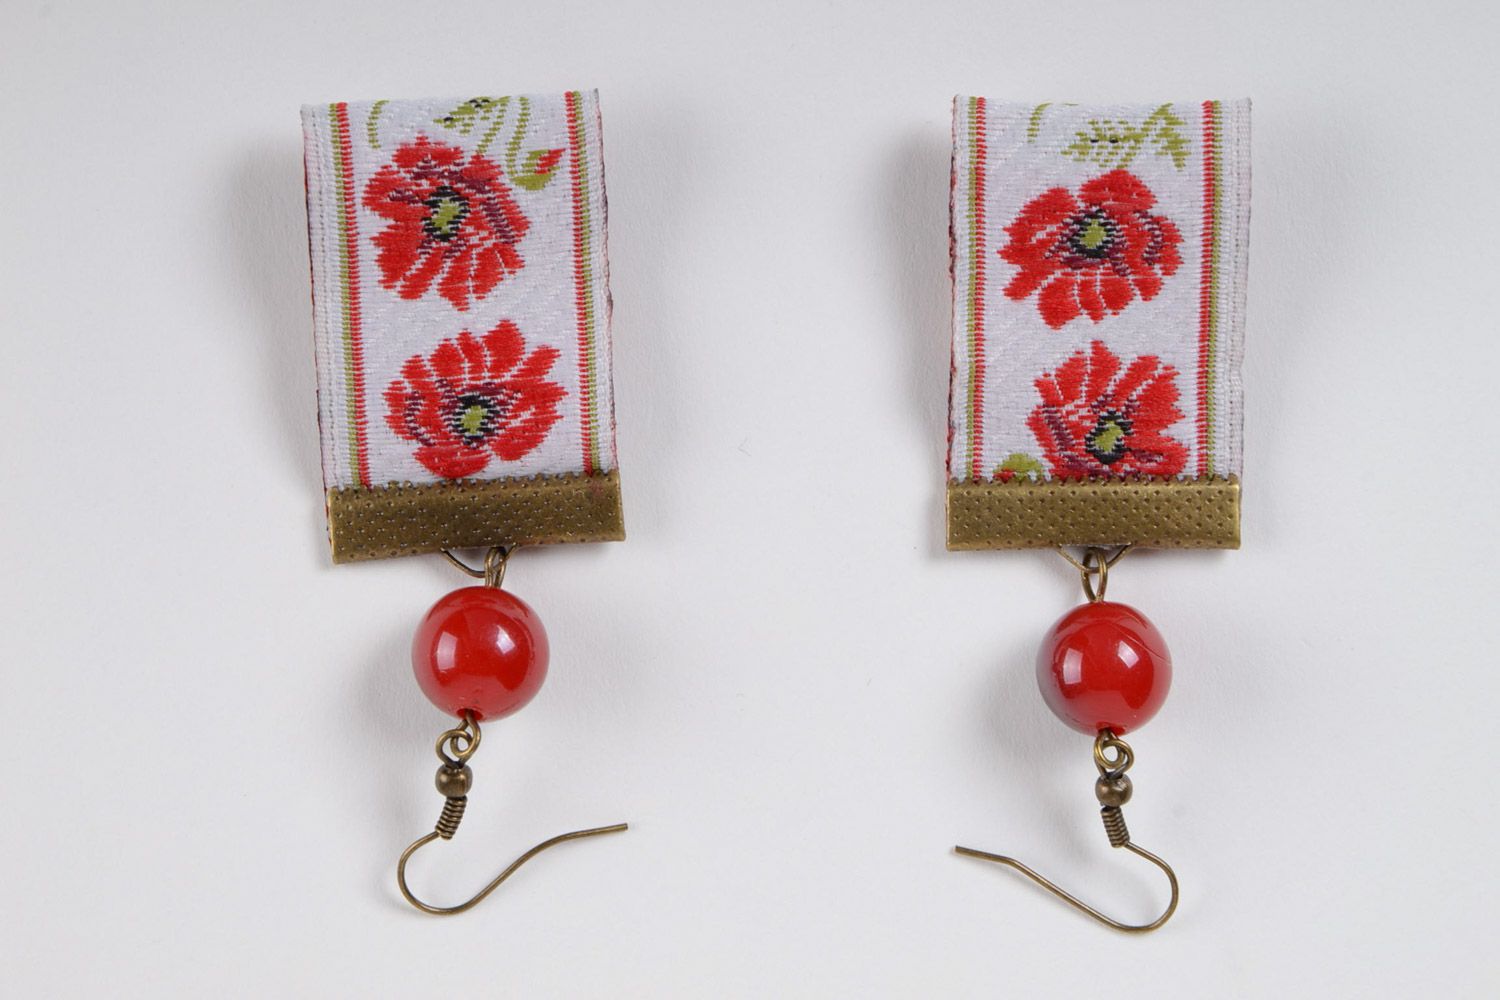 Handmade textile red charm earrings made of lace in ethnic style photo 4